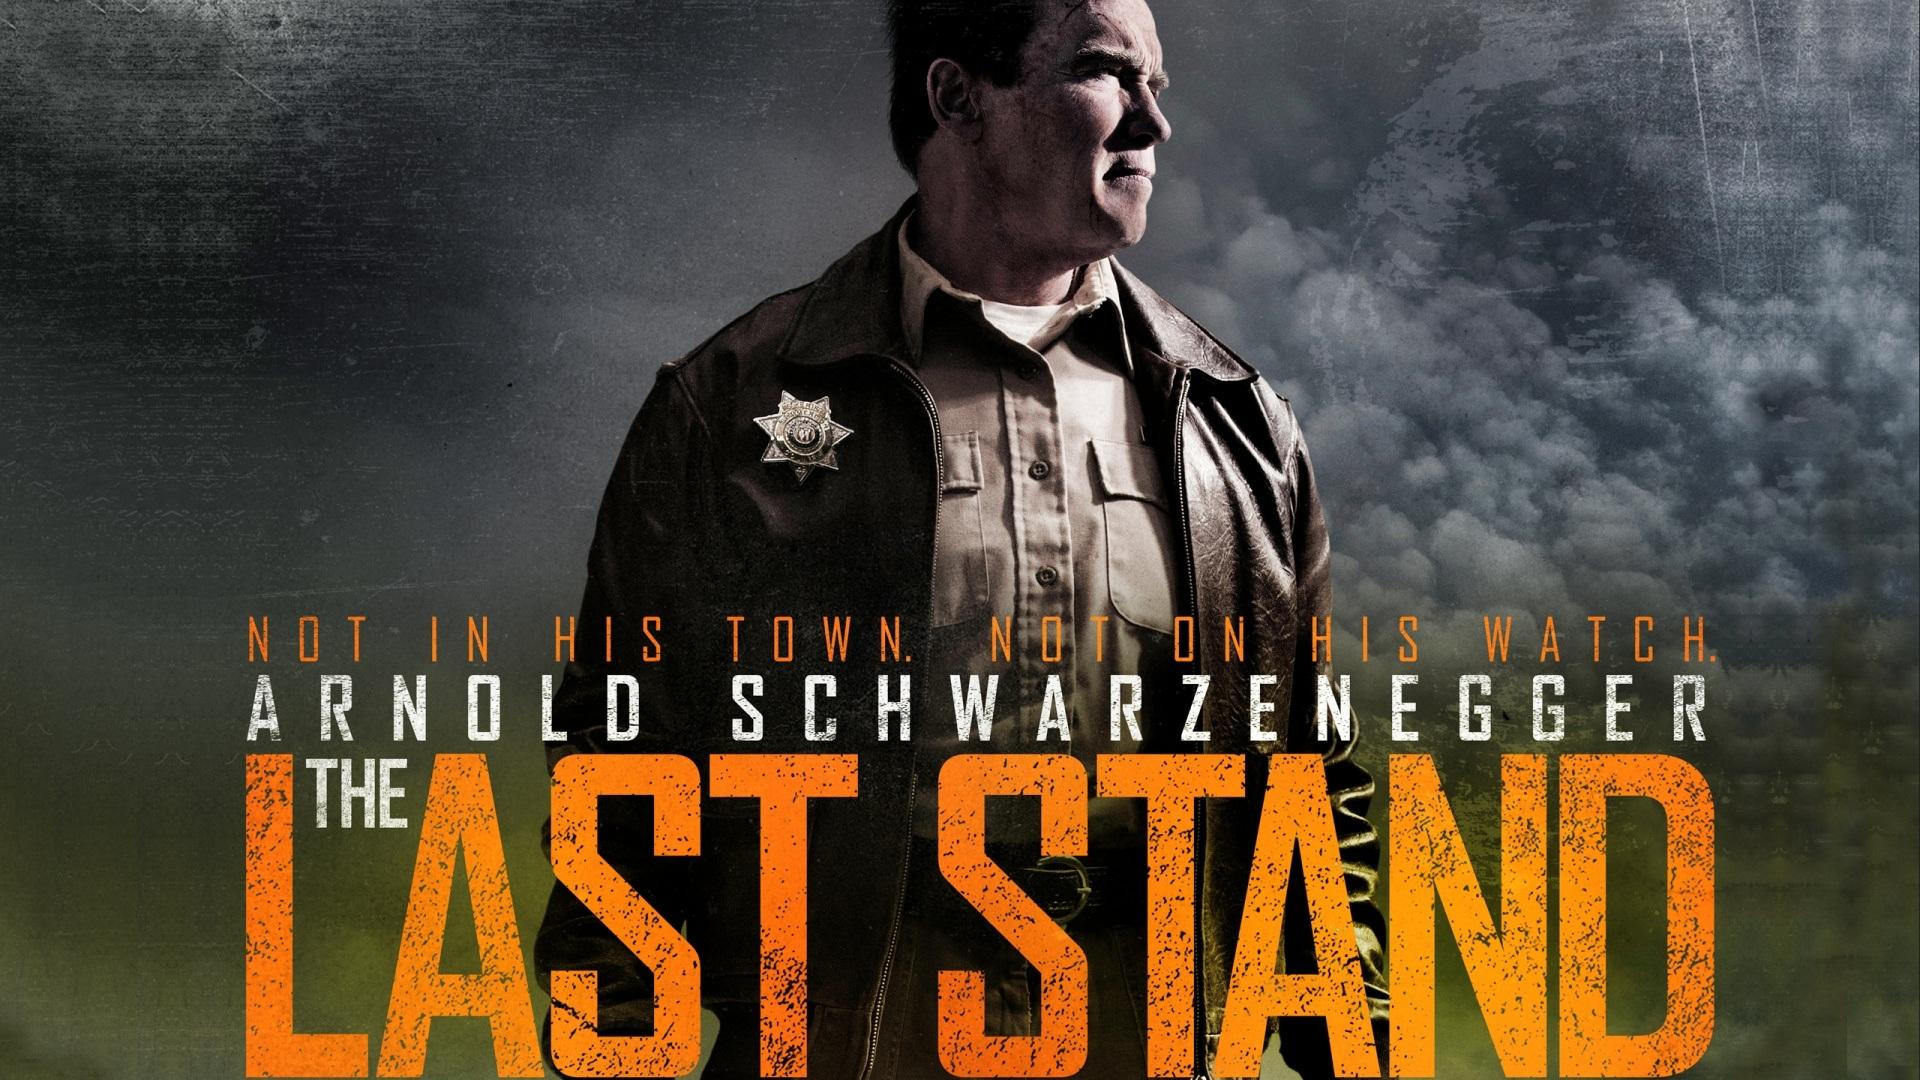 Wallpaper The Last Stand 2013 1920x1080 Full HD 2K Picture